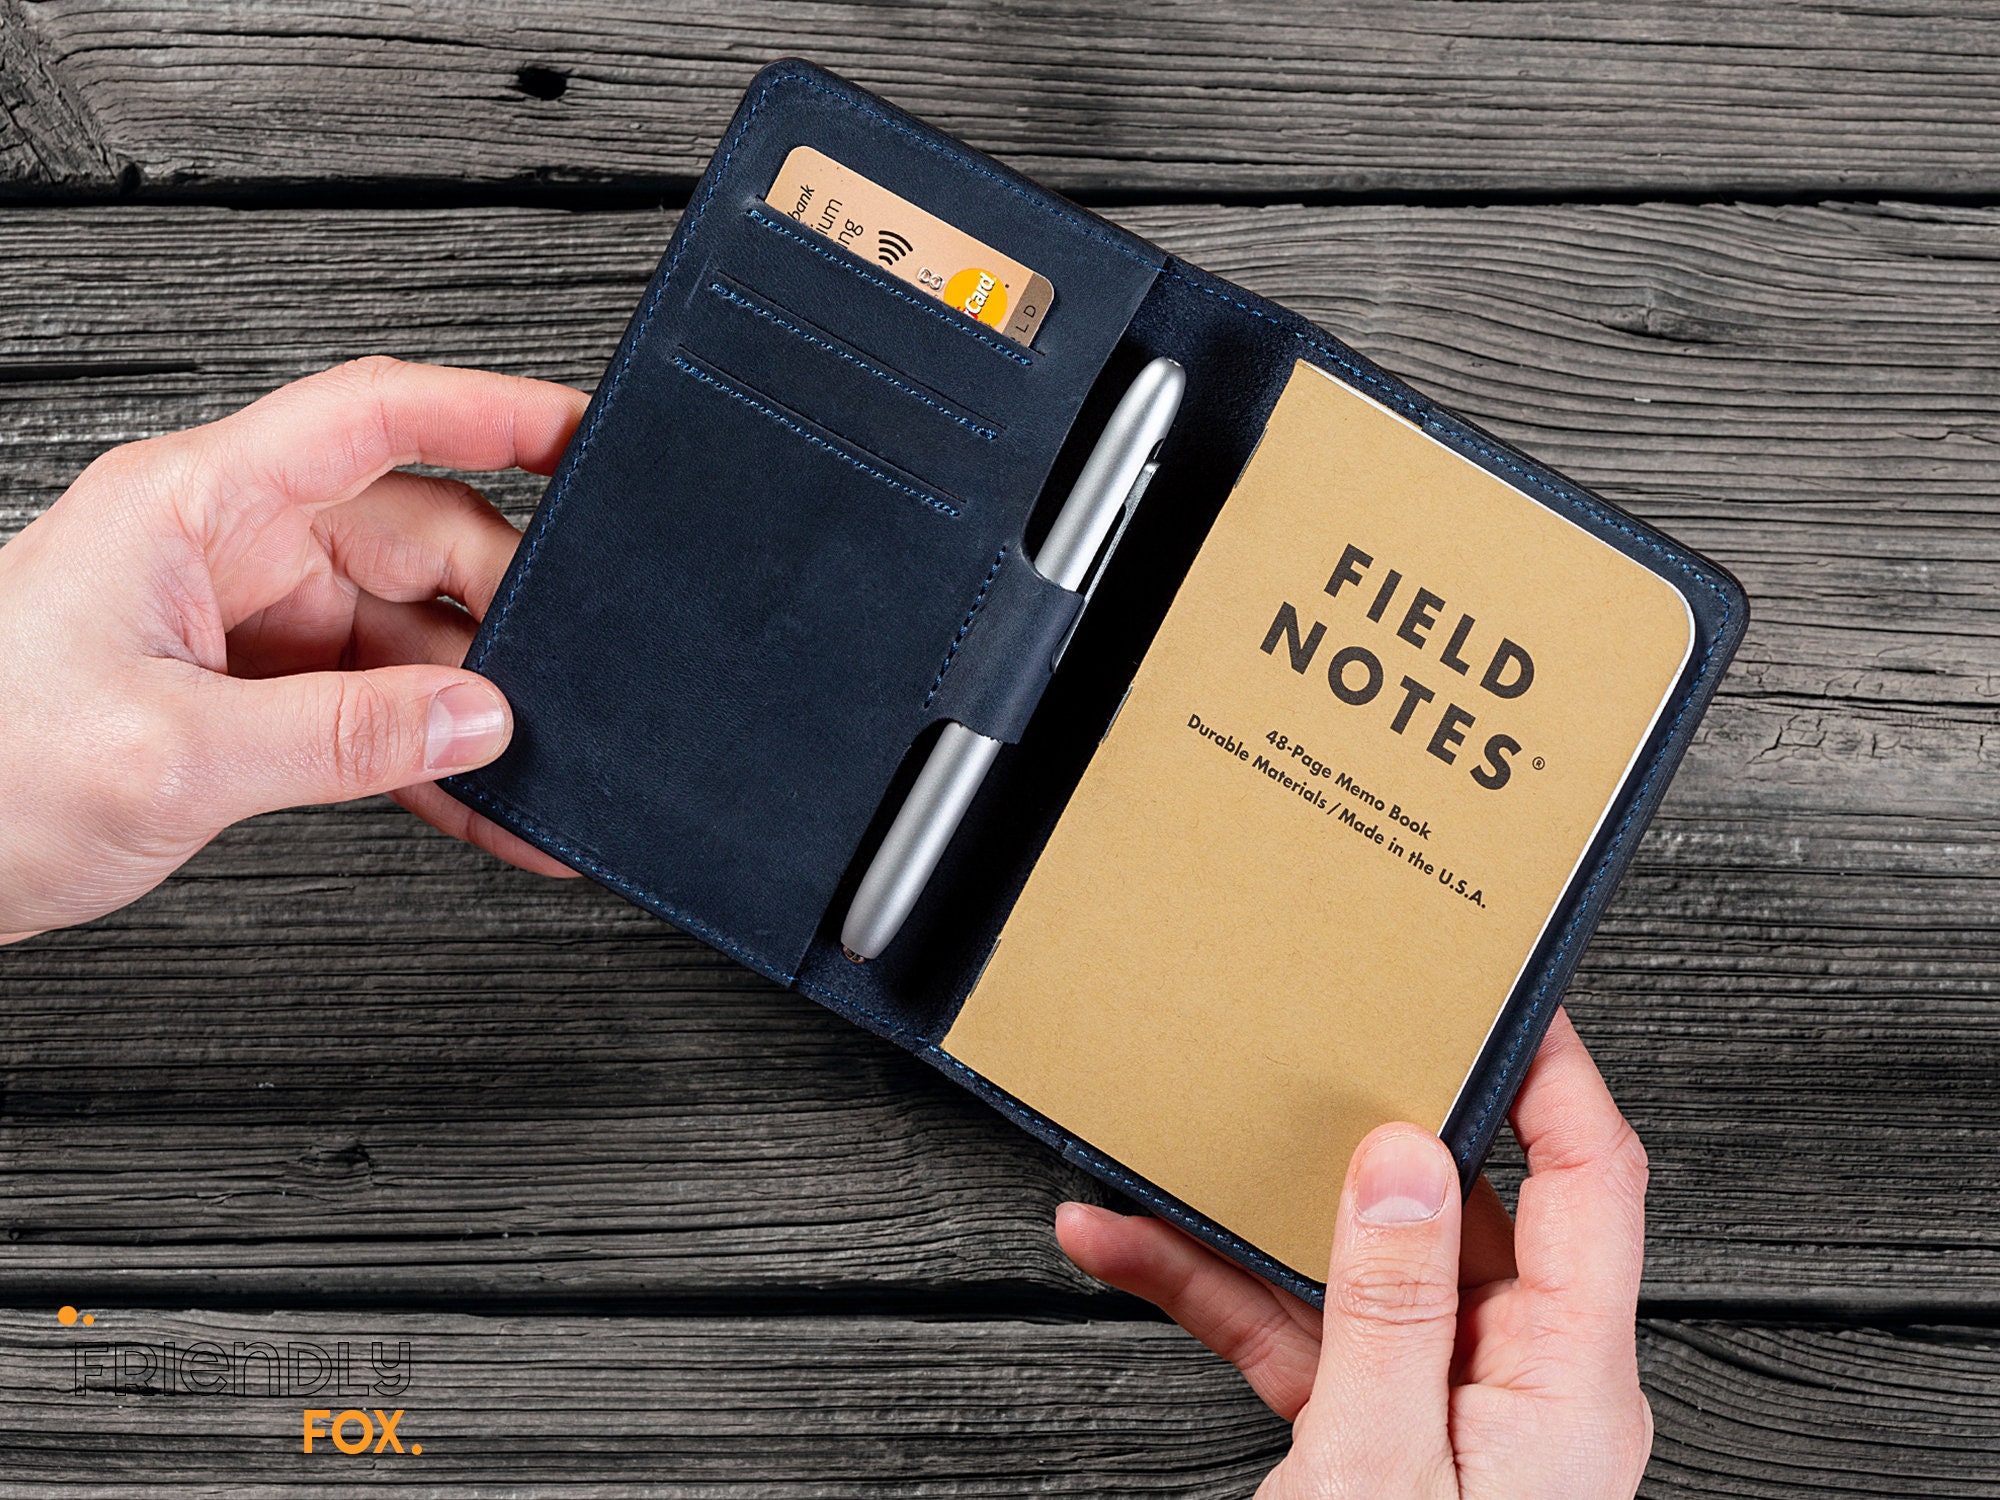 Moleskine Cahier Leather Cover Pocket With Pen Loop, Moleskine Cover XL,  Personalized Refillable Journal, Field Notes Cover Leather 